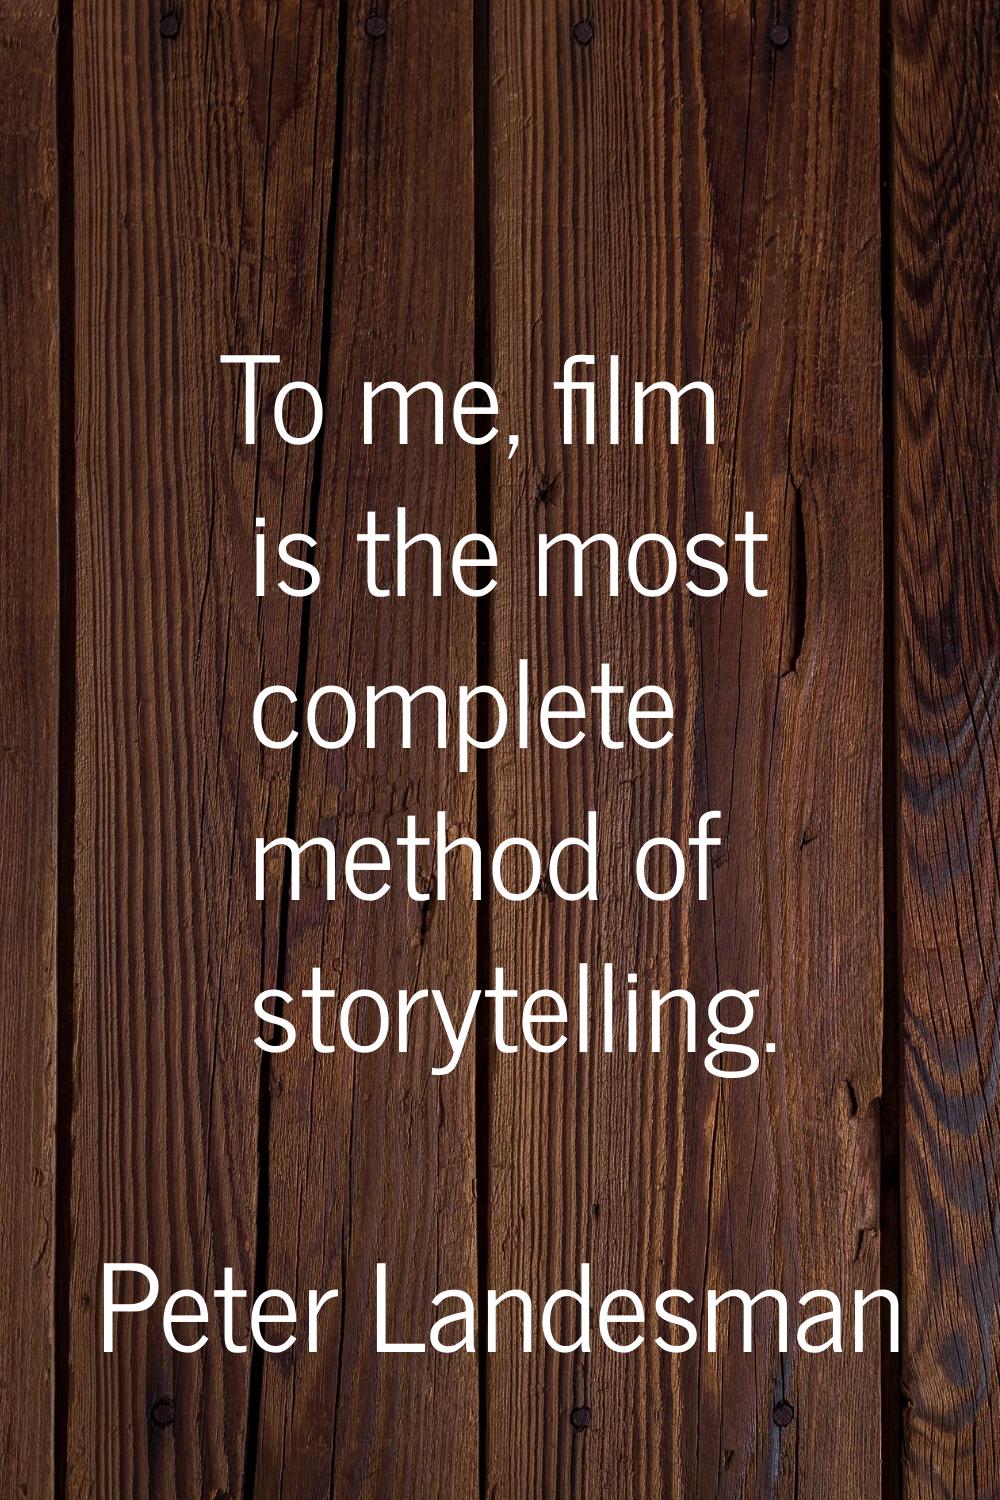 To me, film is the most complete method of storytelling.